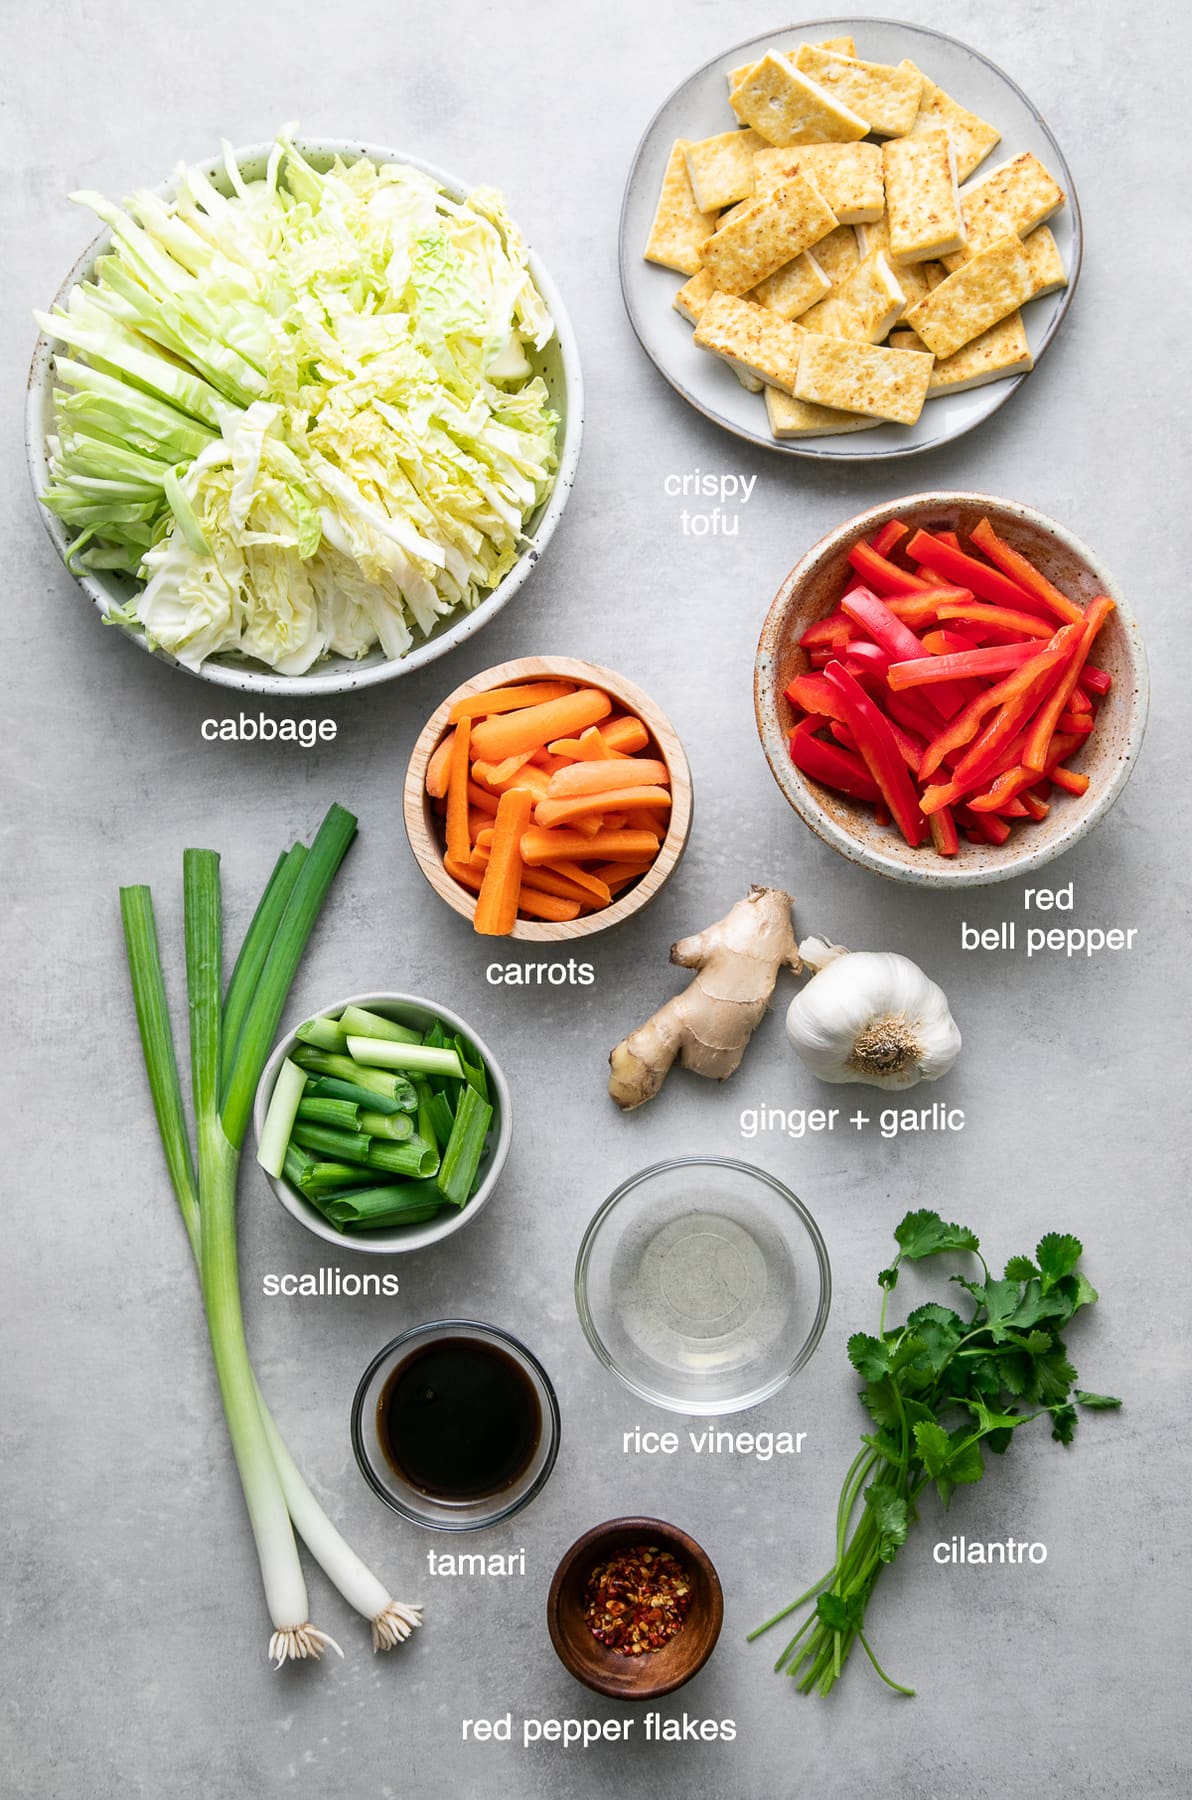 top down view of ingredients used to make cabbage stir fry.